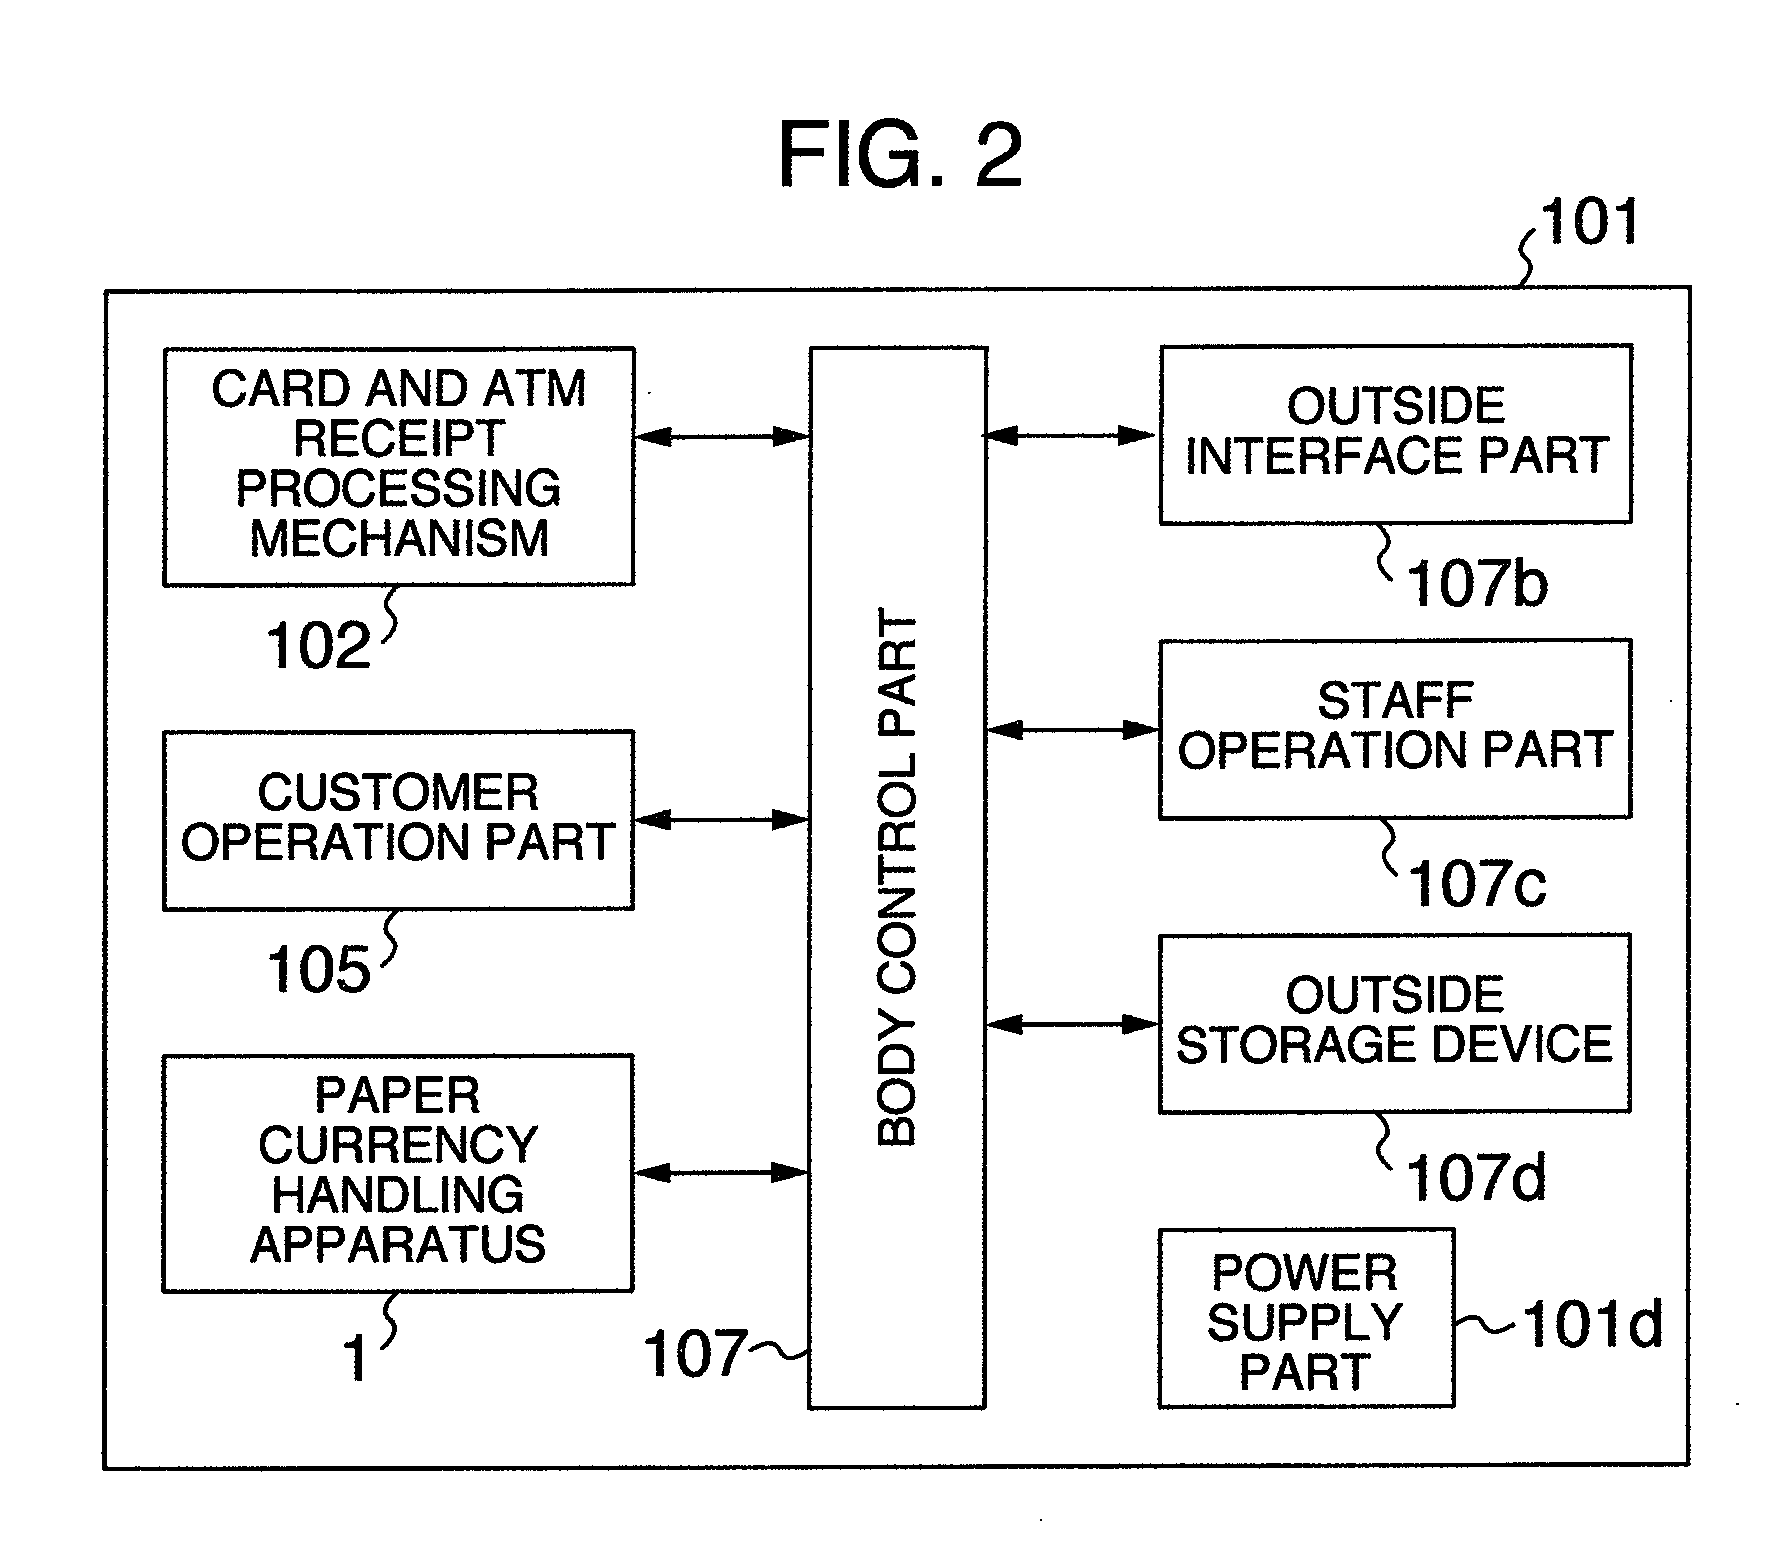 Paper Currency Handling Apparatus